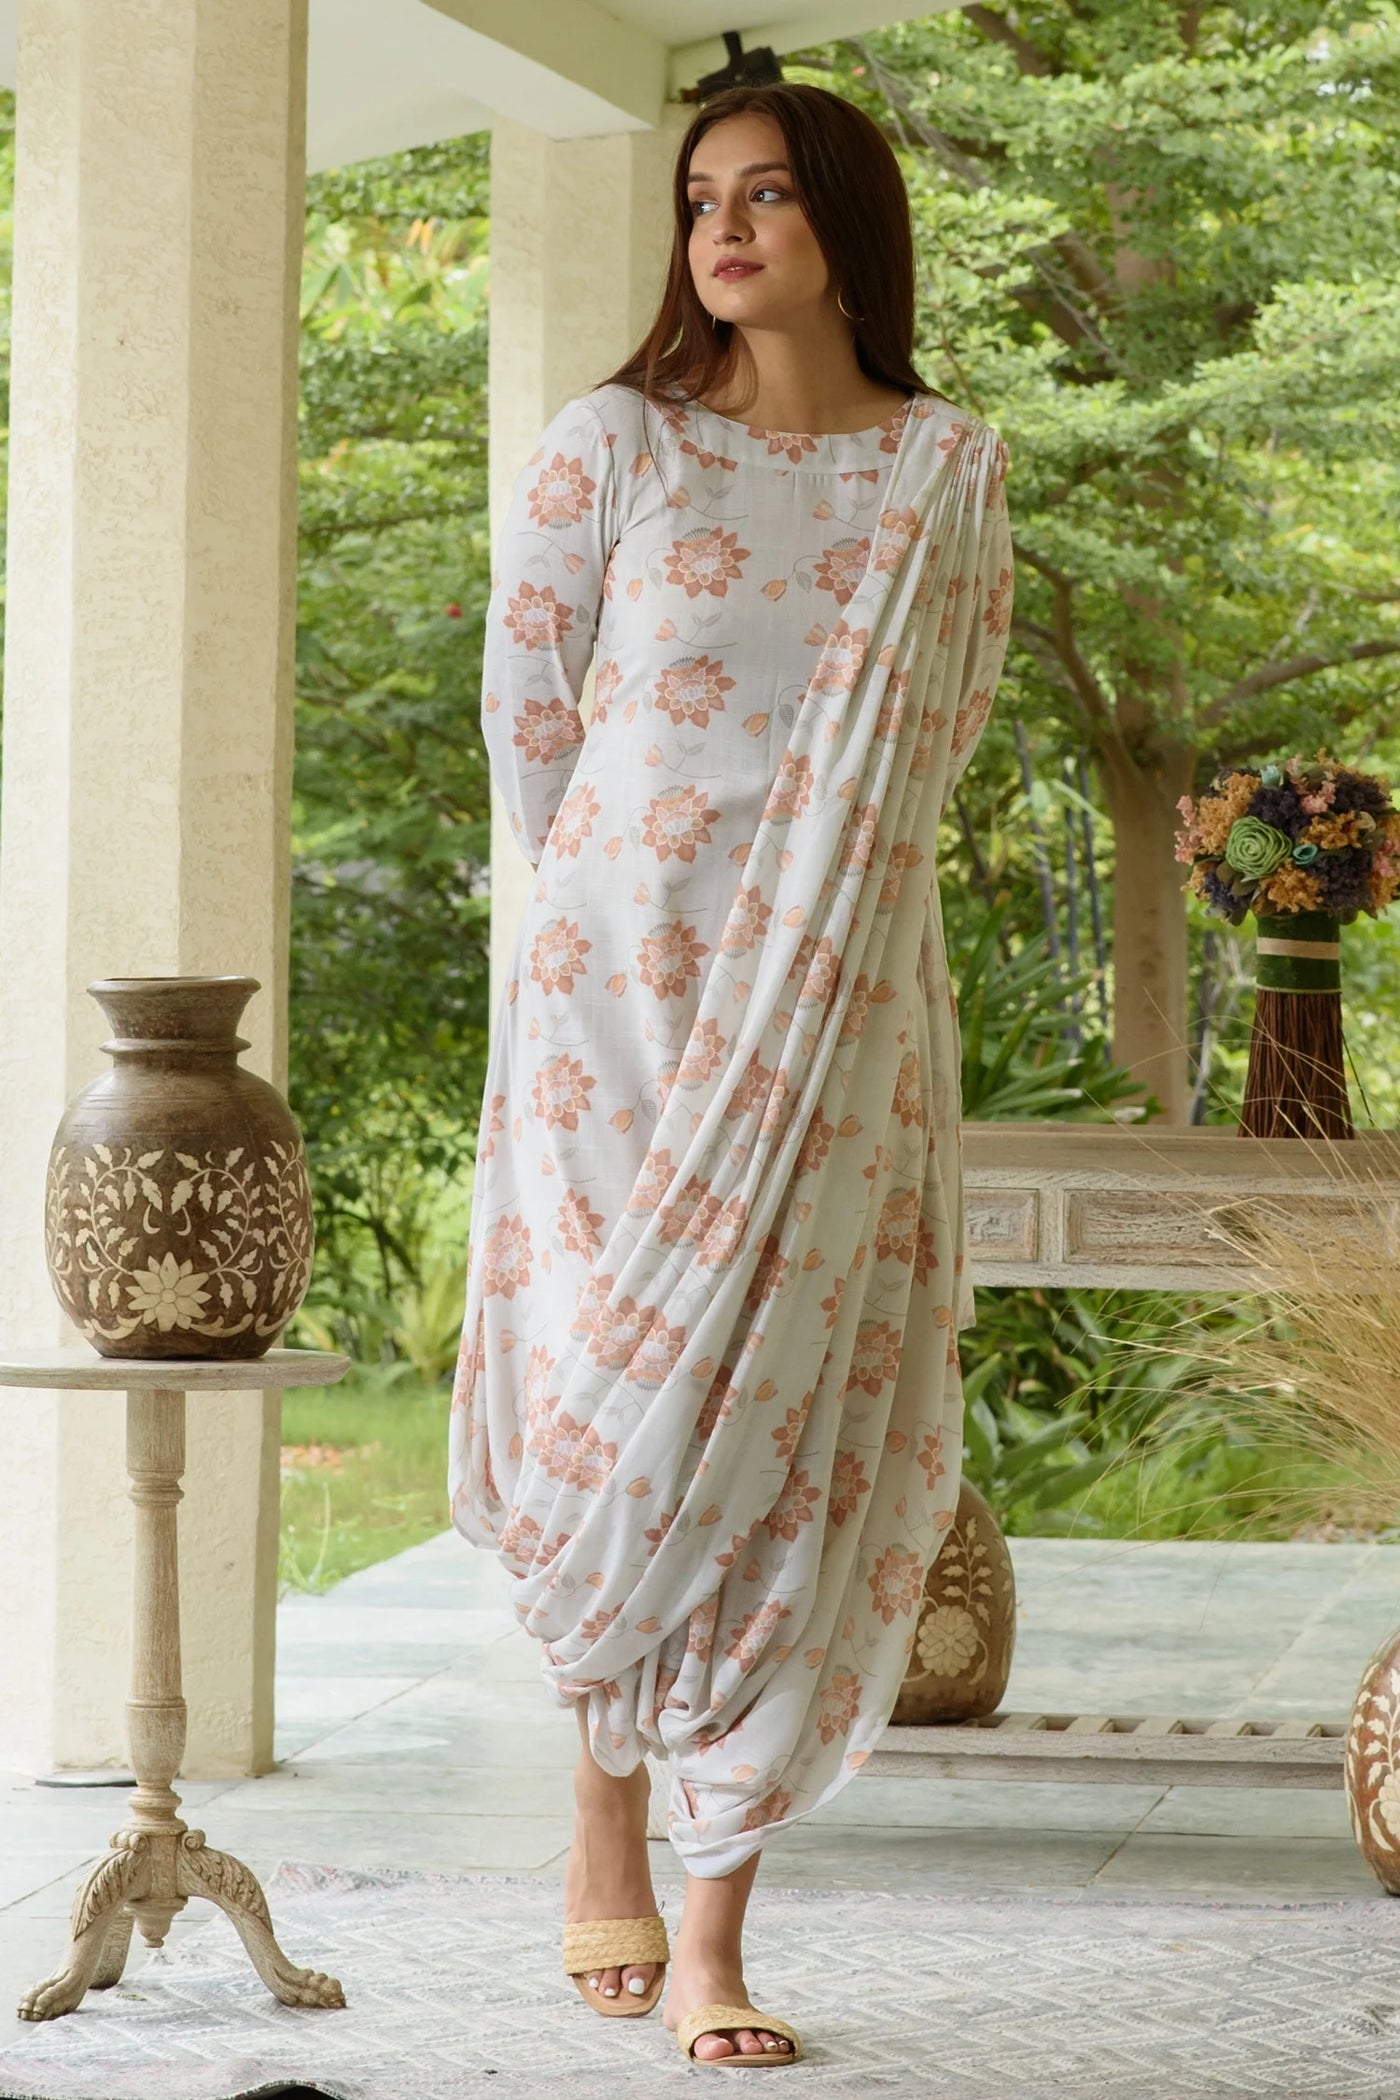 Draped Jumpsuit With Dupatta - Indian Clothing in Denver, CO, Aurora, CO, Boulder, CO, Fort Collins, CO, Colorado Springs, CO, Parker, CO, Highlands Ranch, CO, Cherry Creek, CO, Centennial, CO, and Longmont, CO. Nationwide shipping USA - India Fashion X